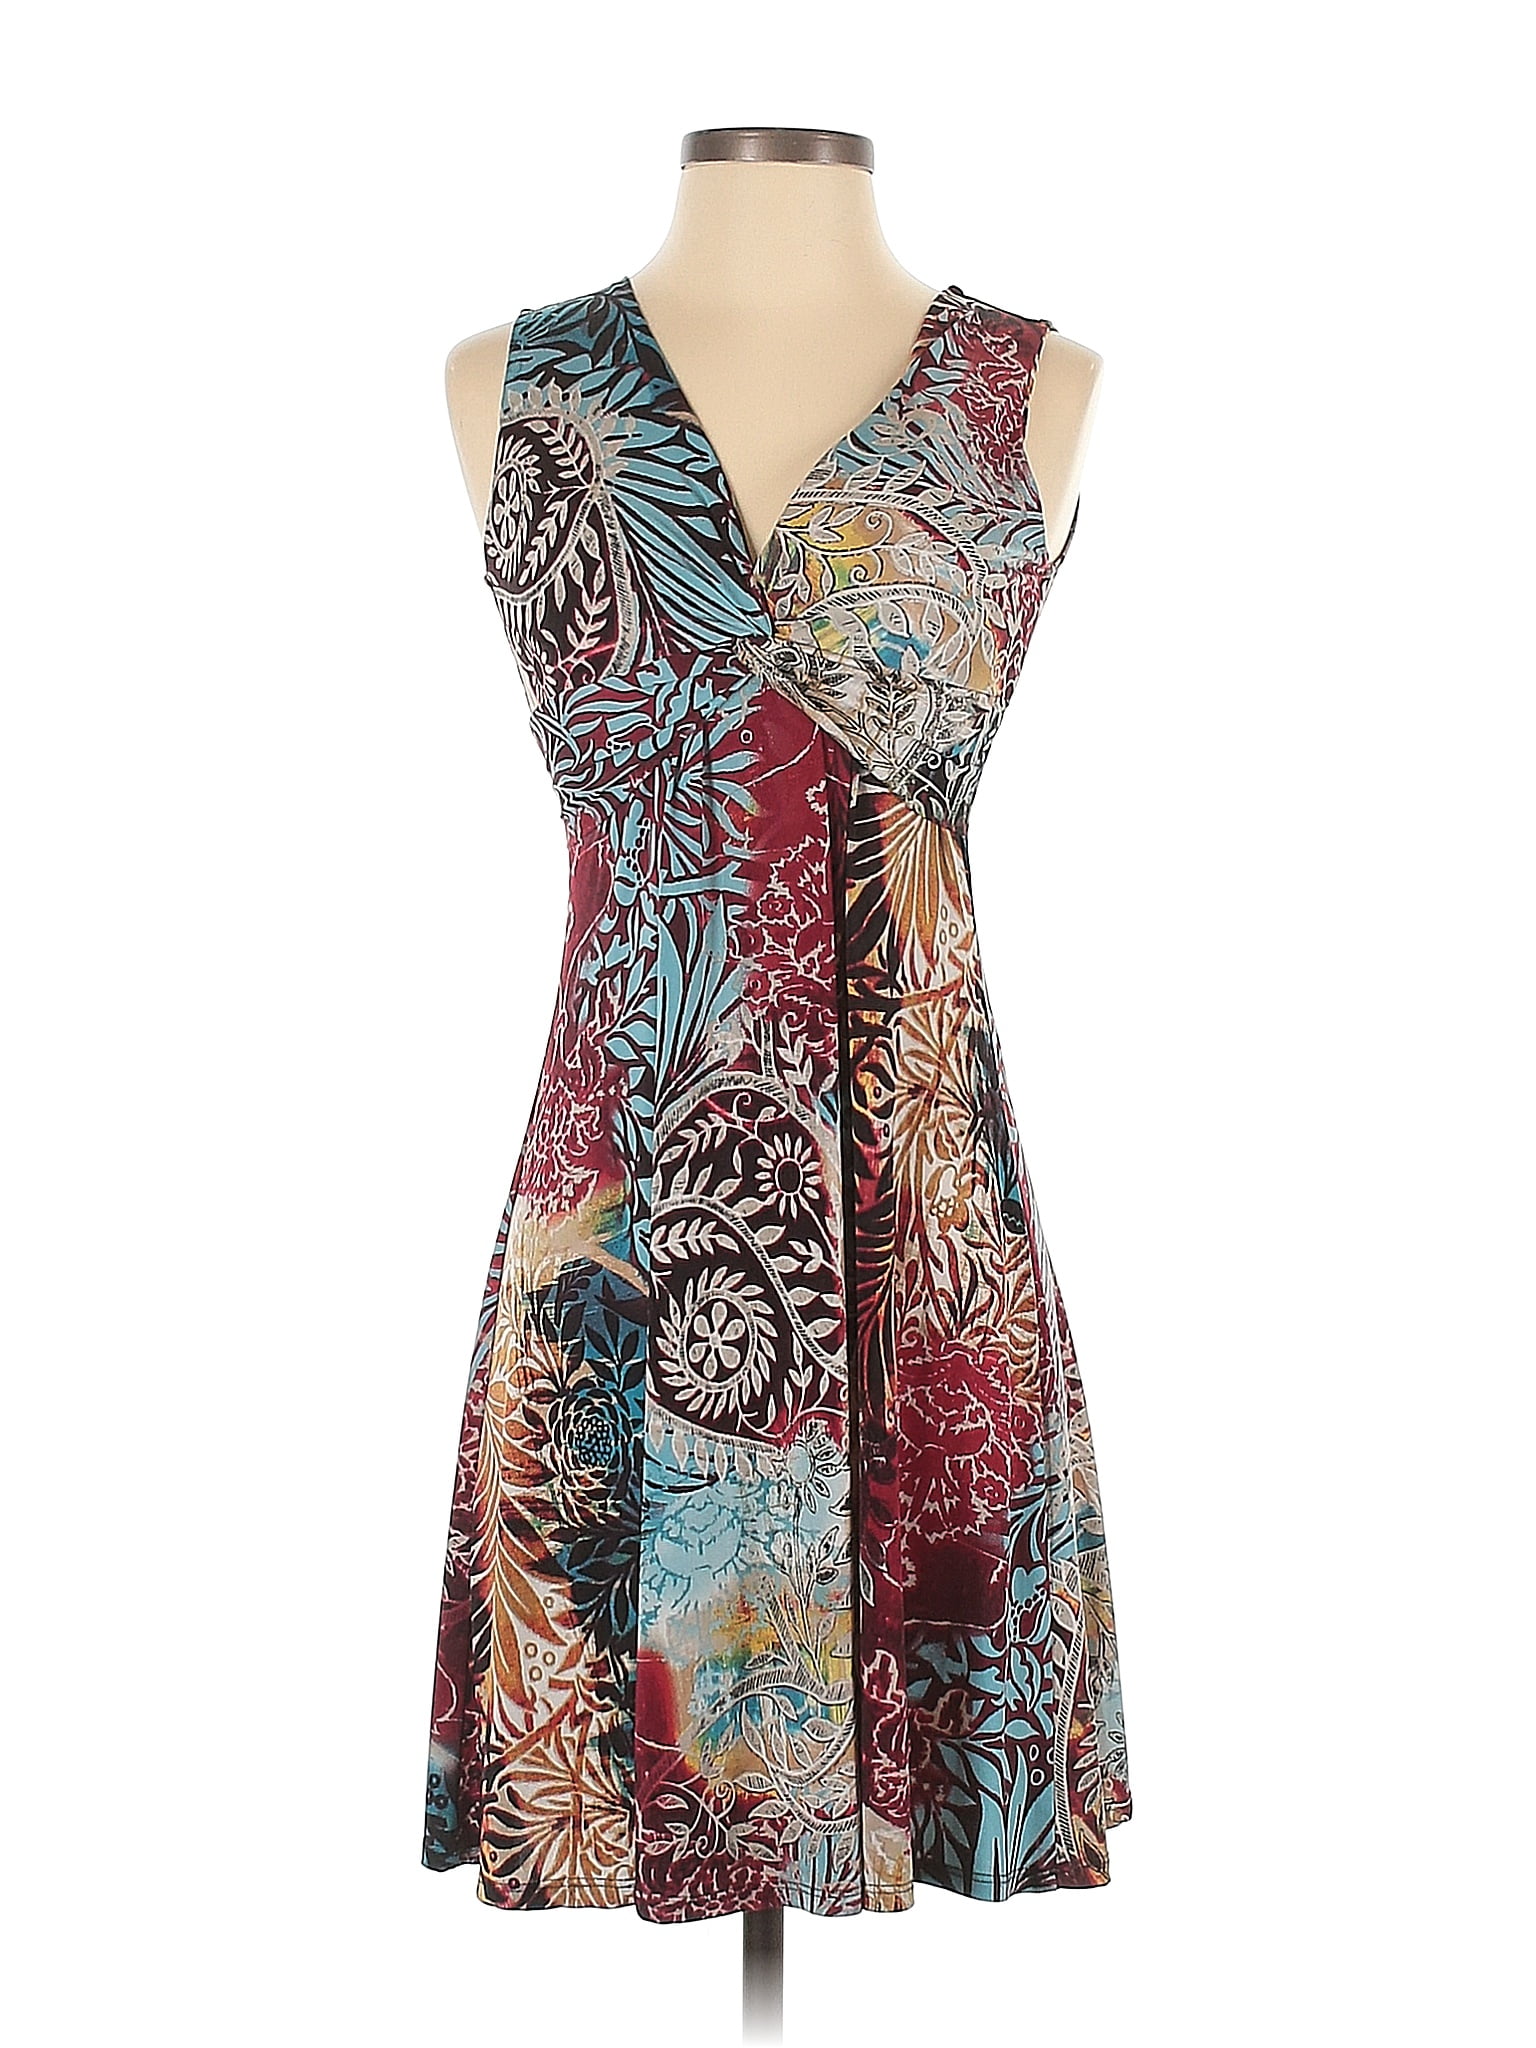 Assorted Brands Multi Color Burgundy Casual Dress Size S - 62% off ...